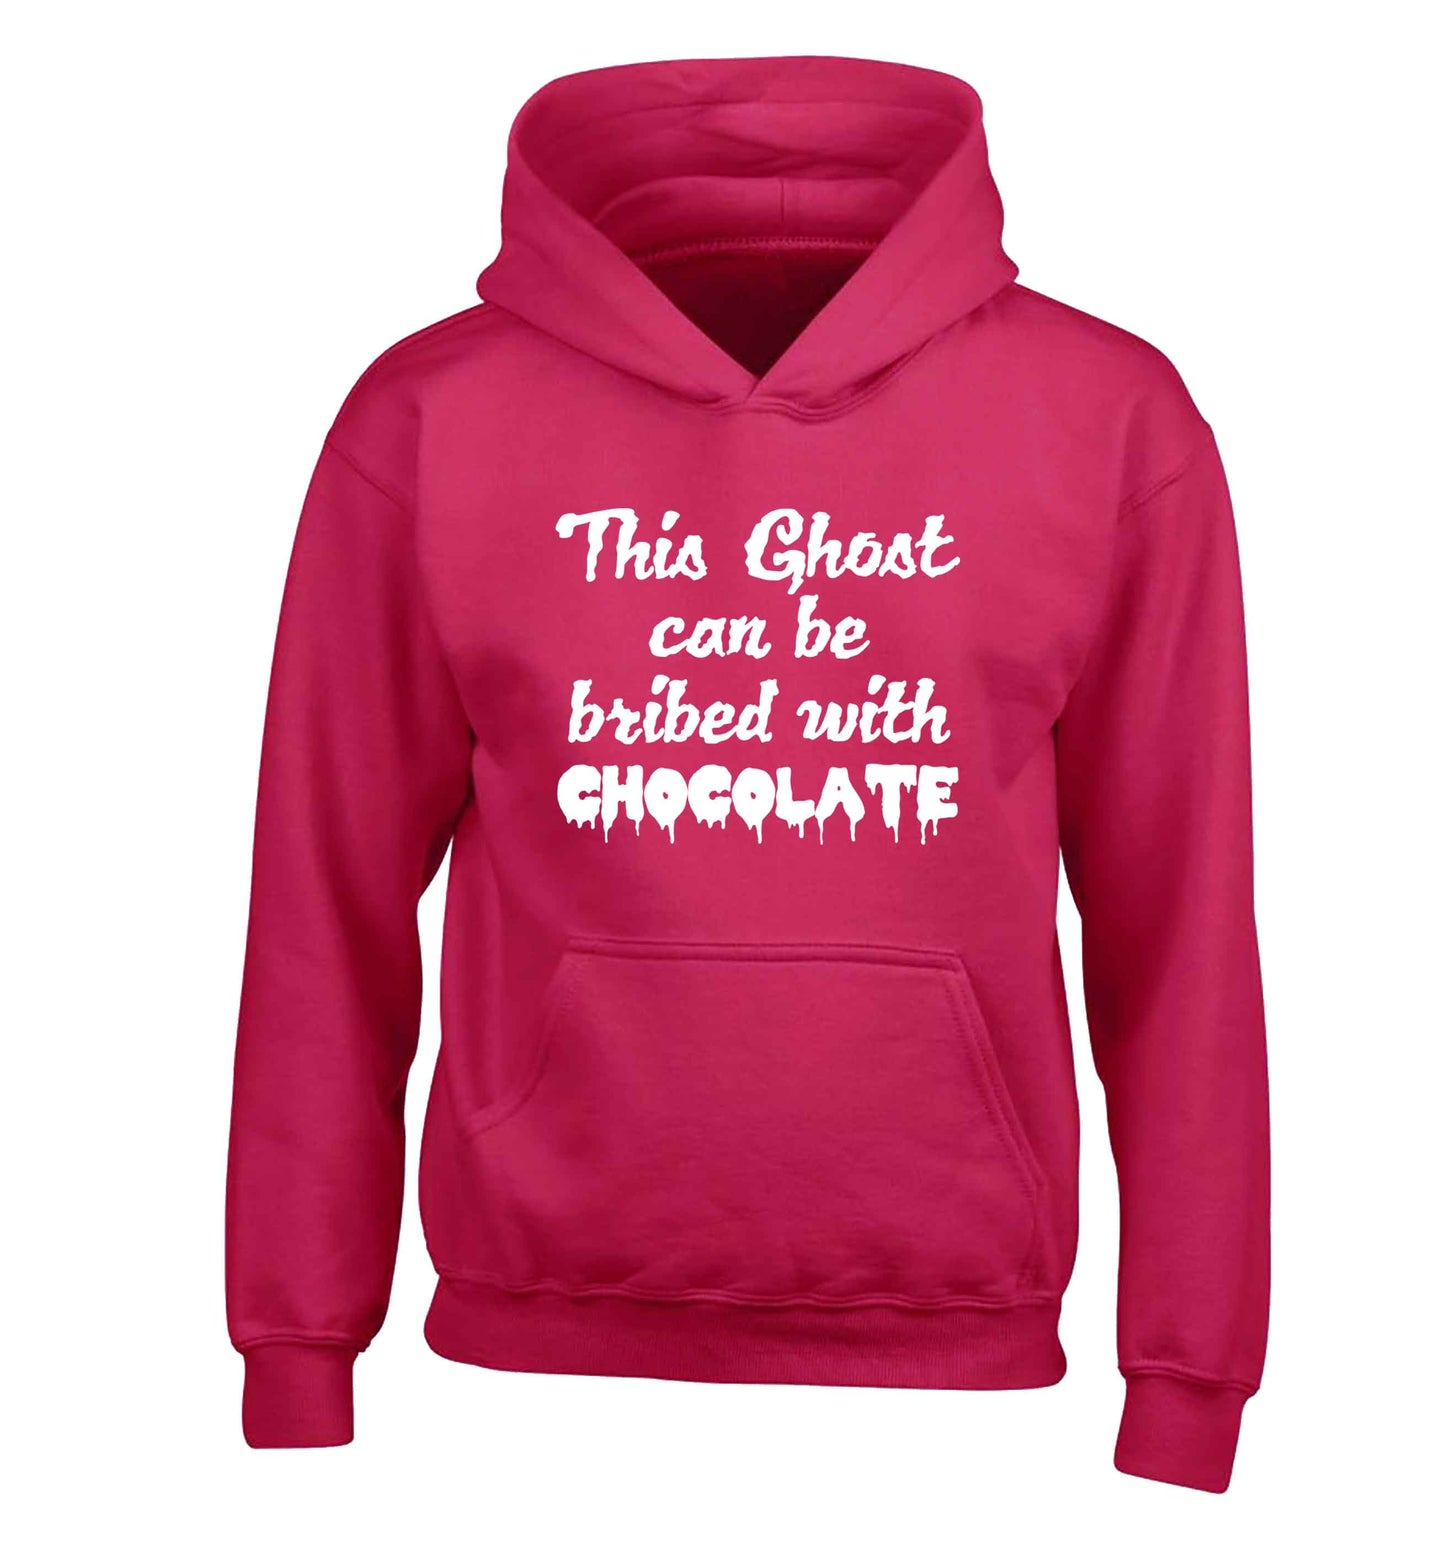 This ghost can be bribed with chocolate children's pink hoodie 12-13 Years